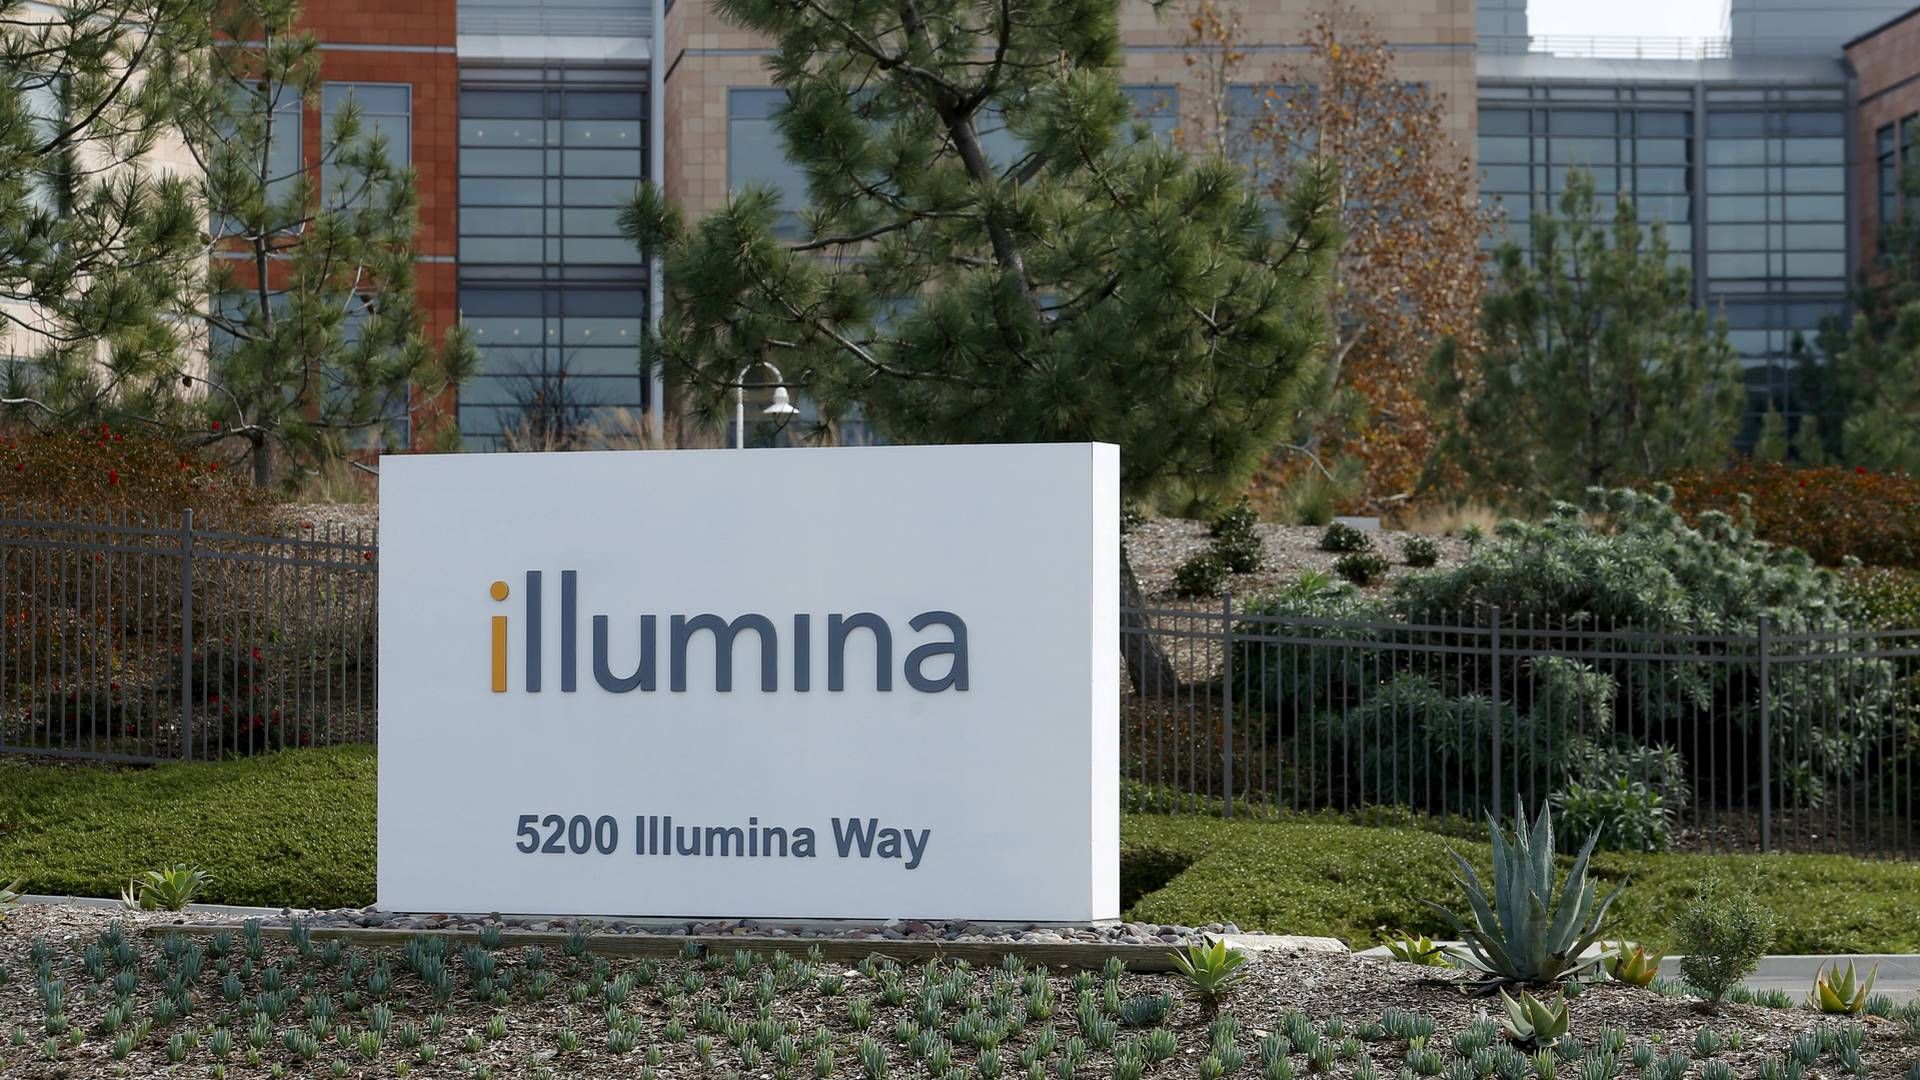 Baillie Gifford has a big stake in gene sequencing company Illumina. The share price is down by 42% year-to-date. | Photo: Mike Blake/REUTERS / X00030